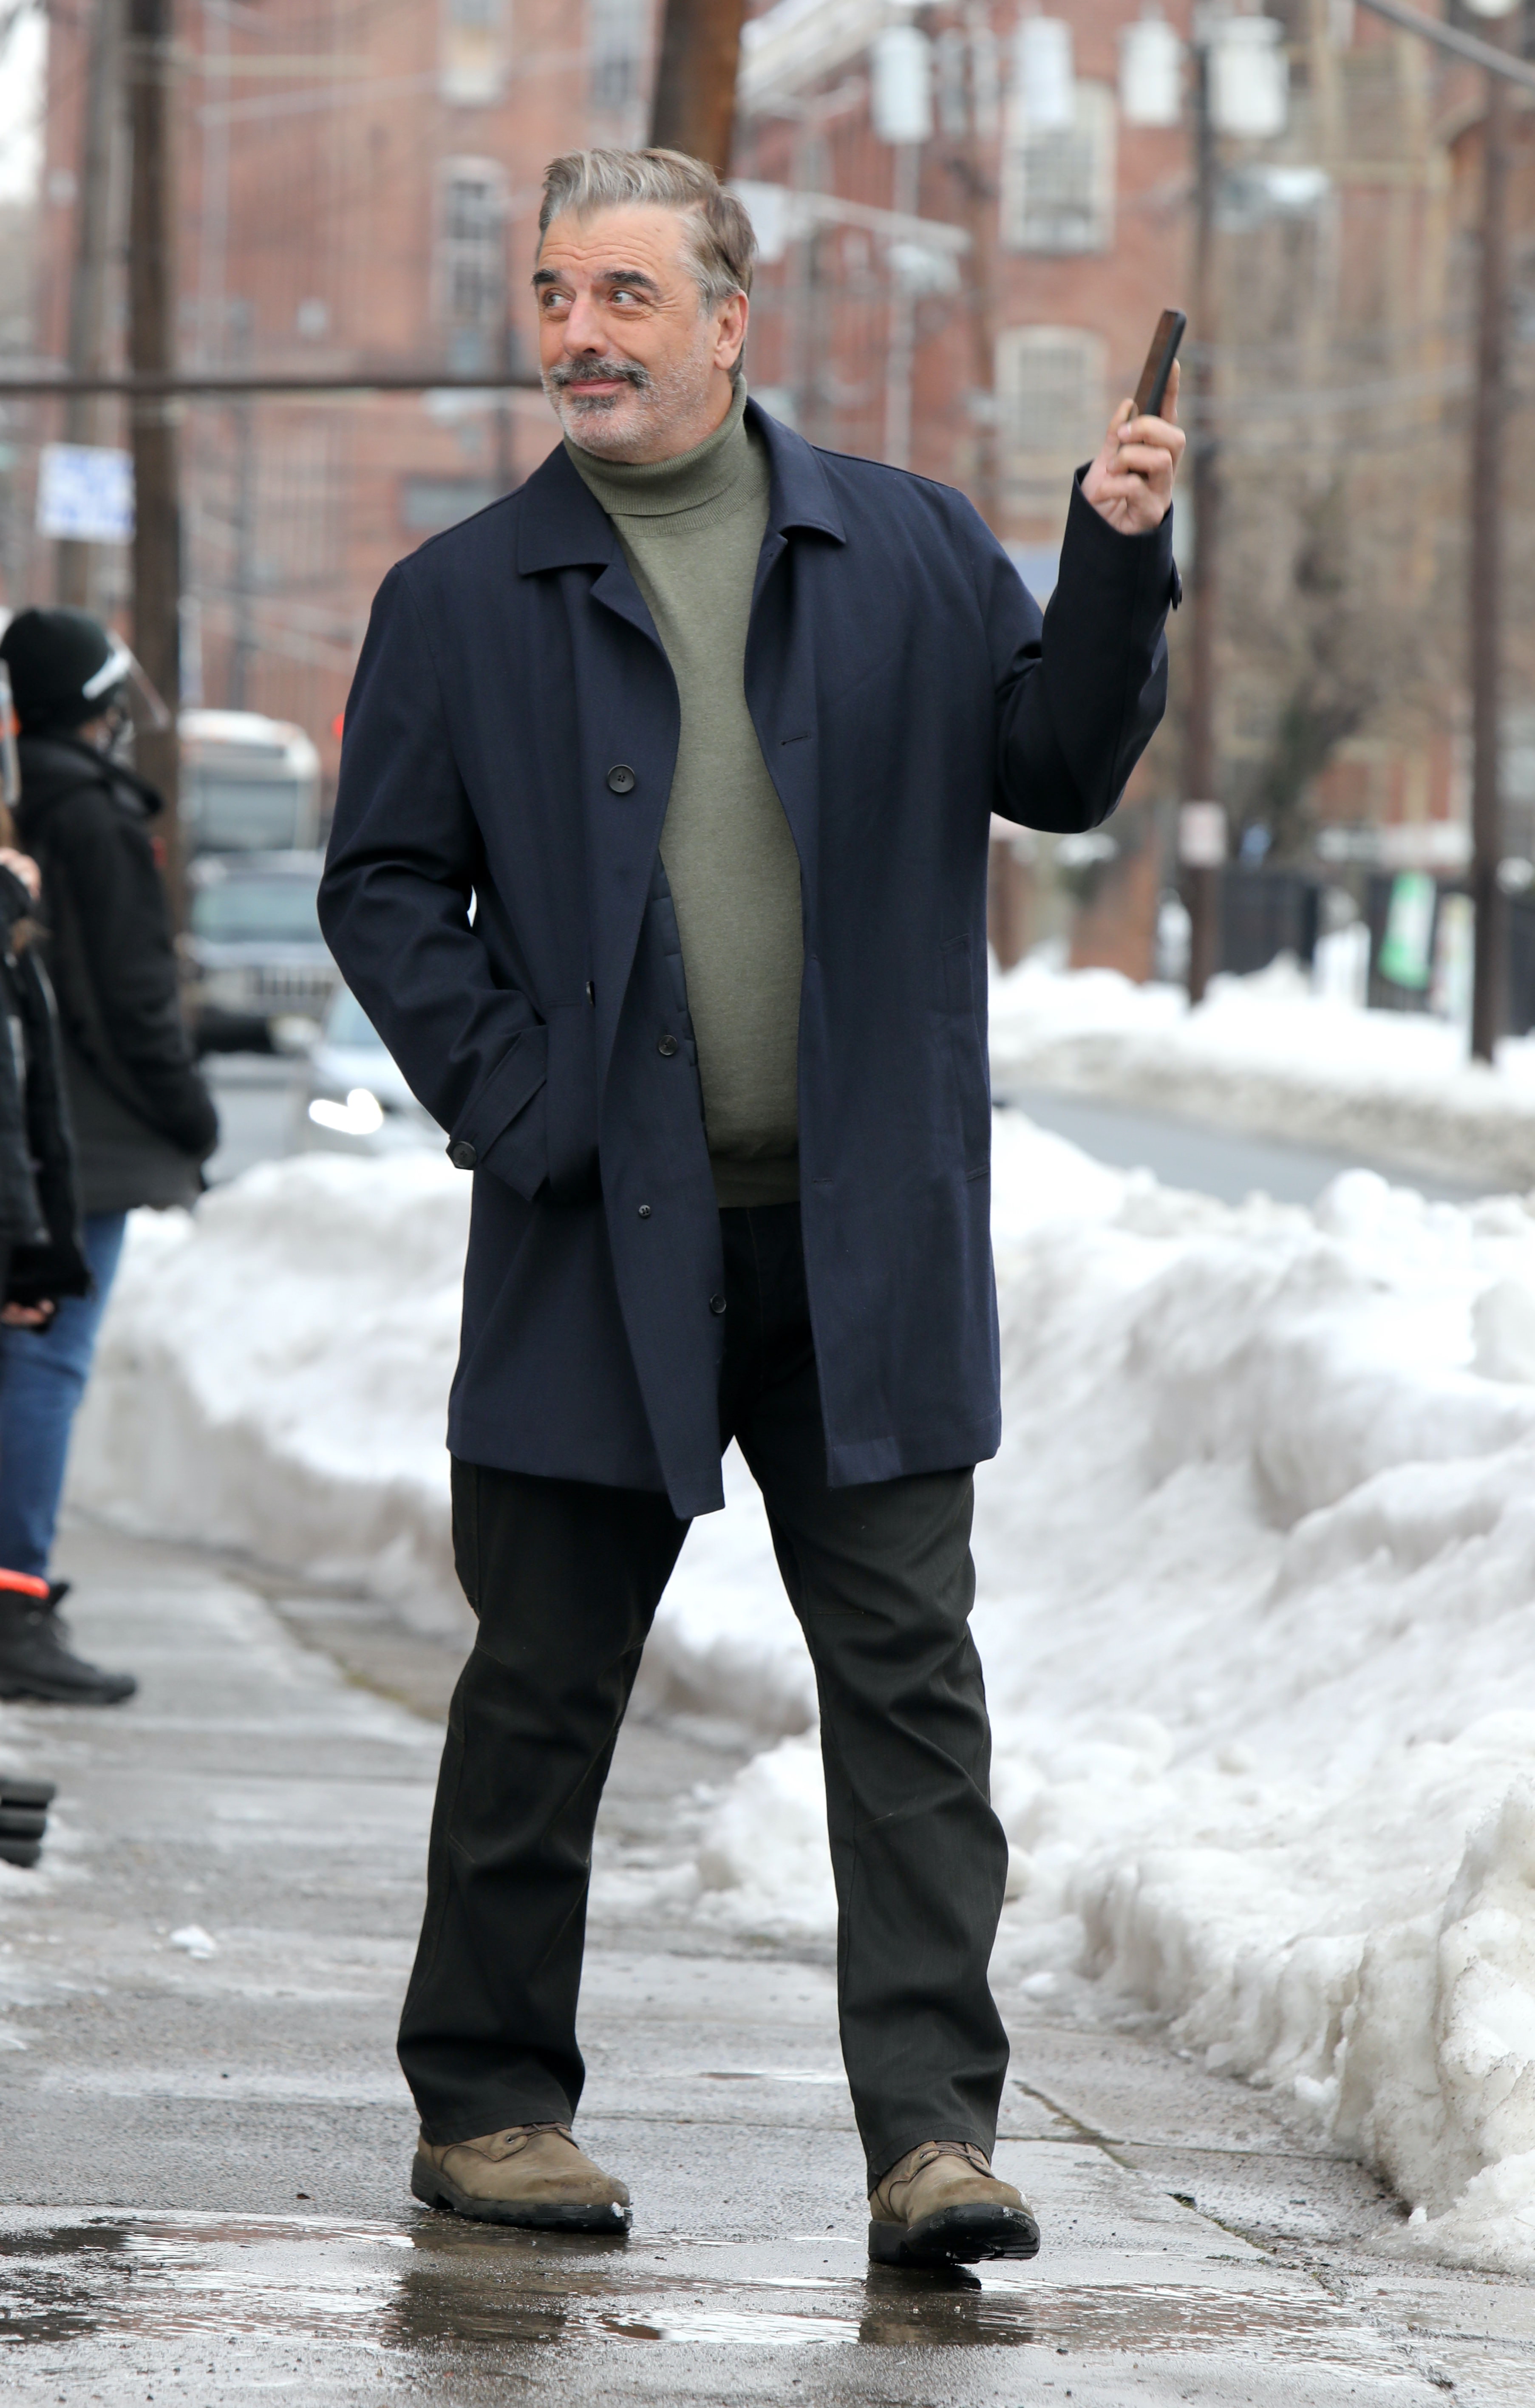 Chris Noth on the set of "The Equalizer" on February 5, 2021| Source: Getty Images